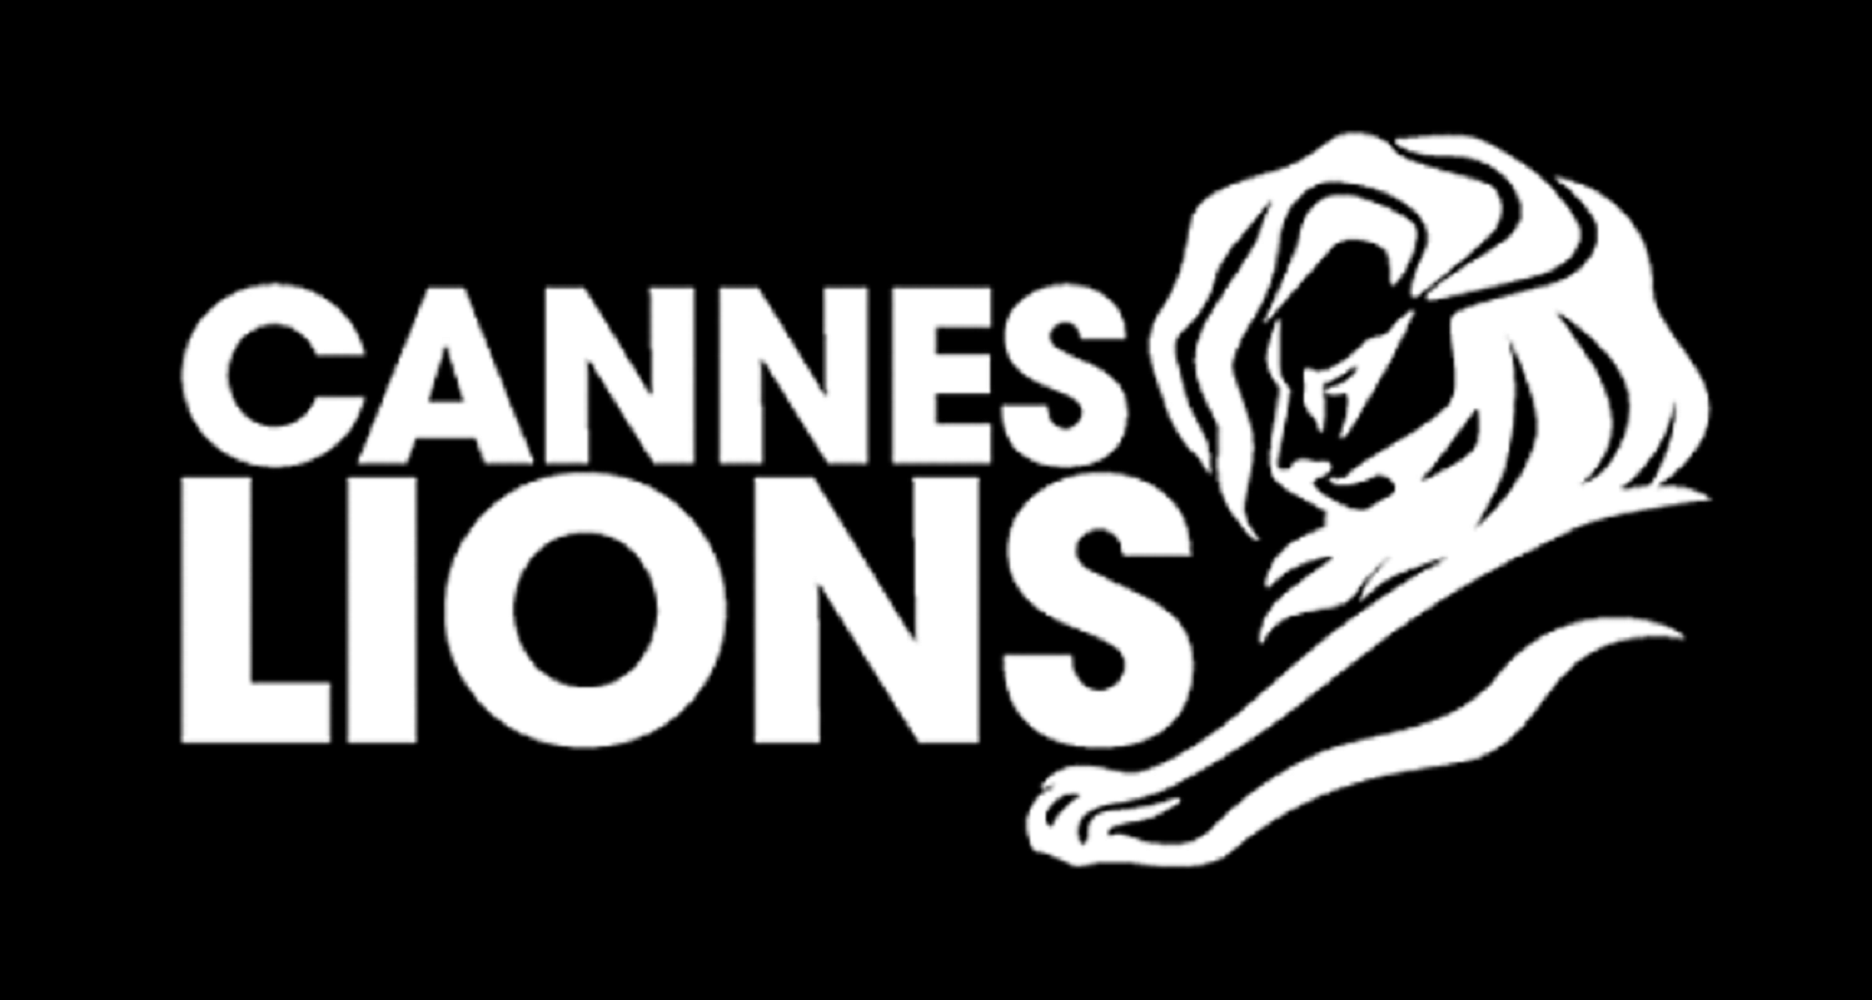 Cannes Lions and Associated Awards Programs Exclude Russian Organizations